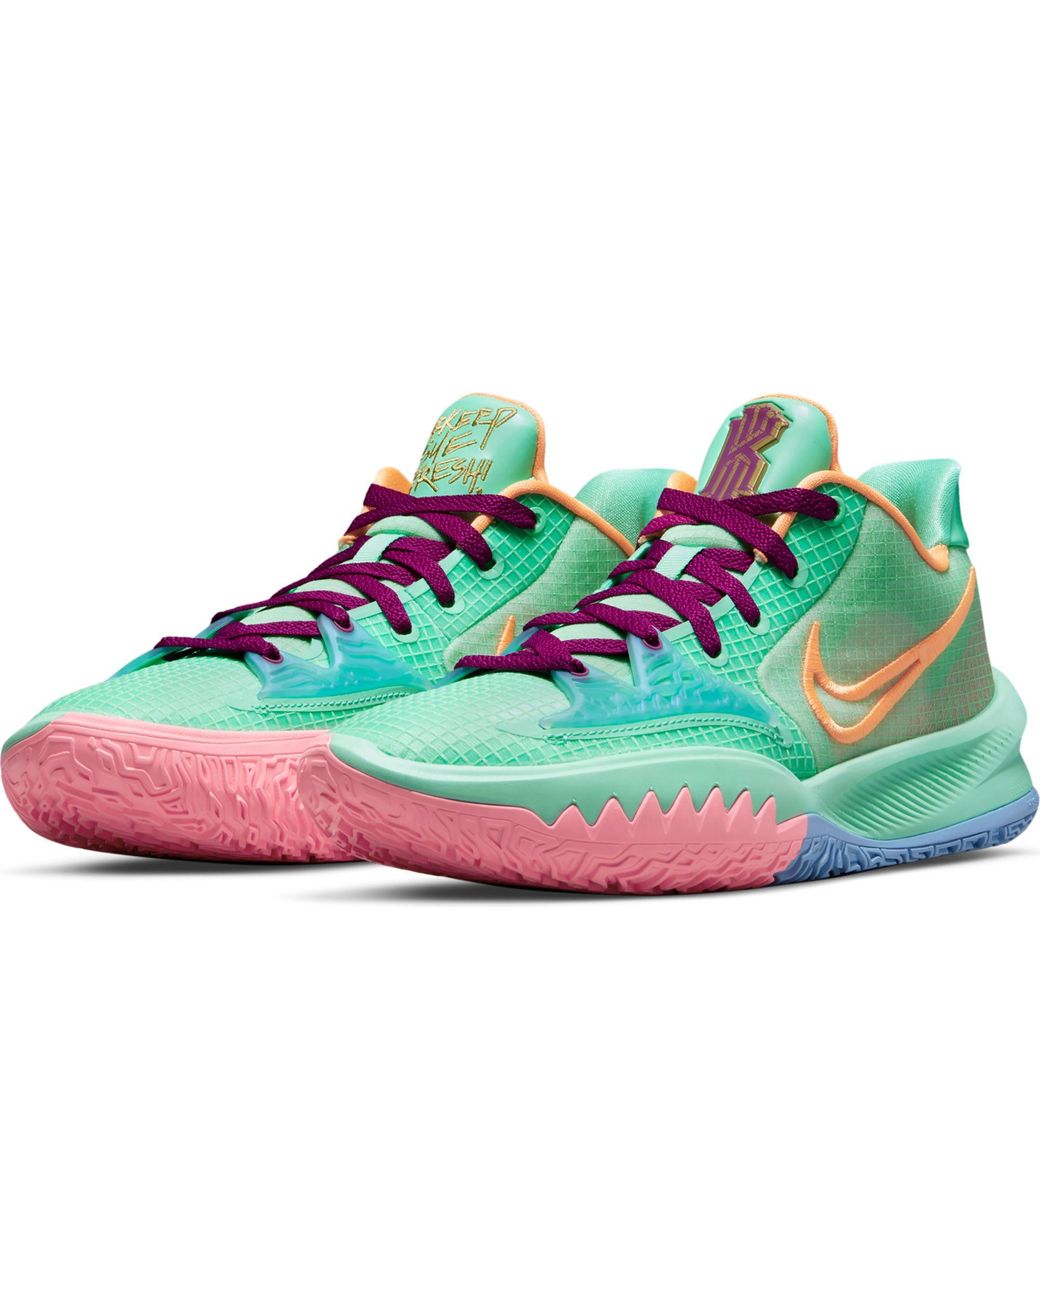 Nike Rubber Kyrie Low 4 Basketball Shoes in Green/Orange (Green) | Lyst